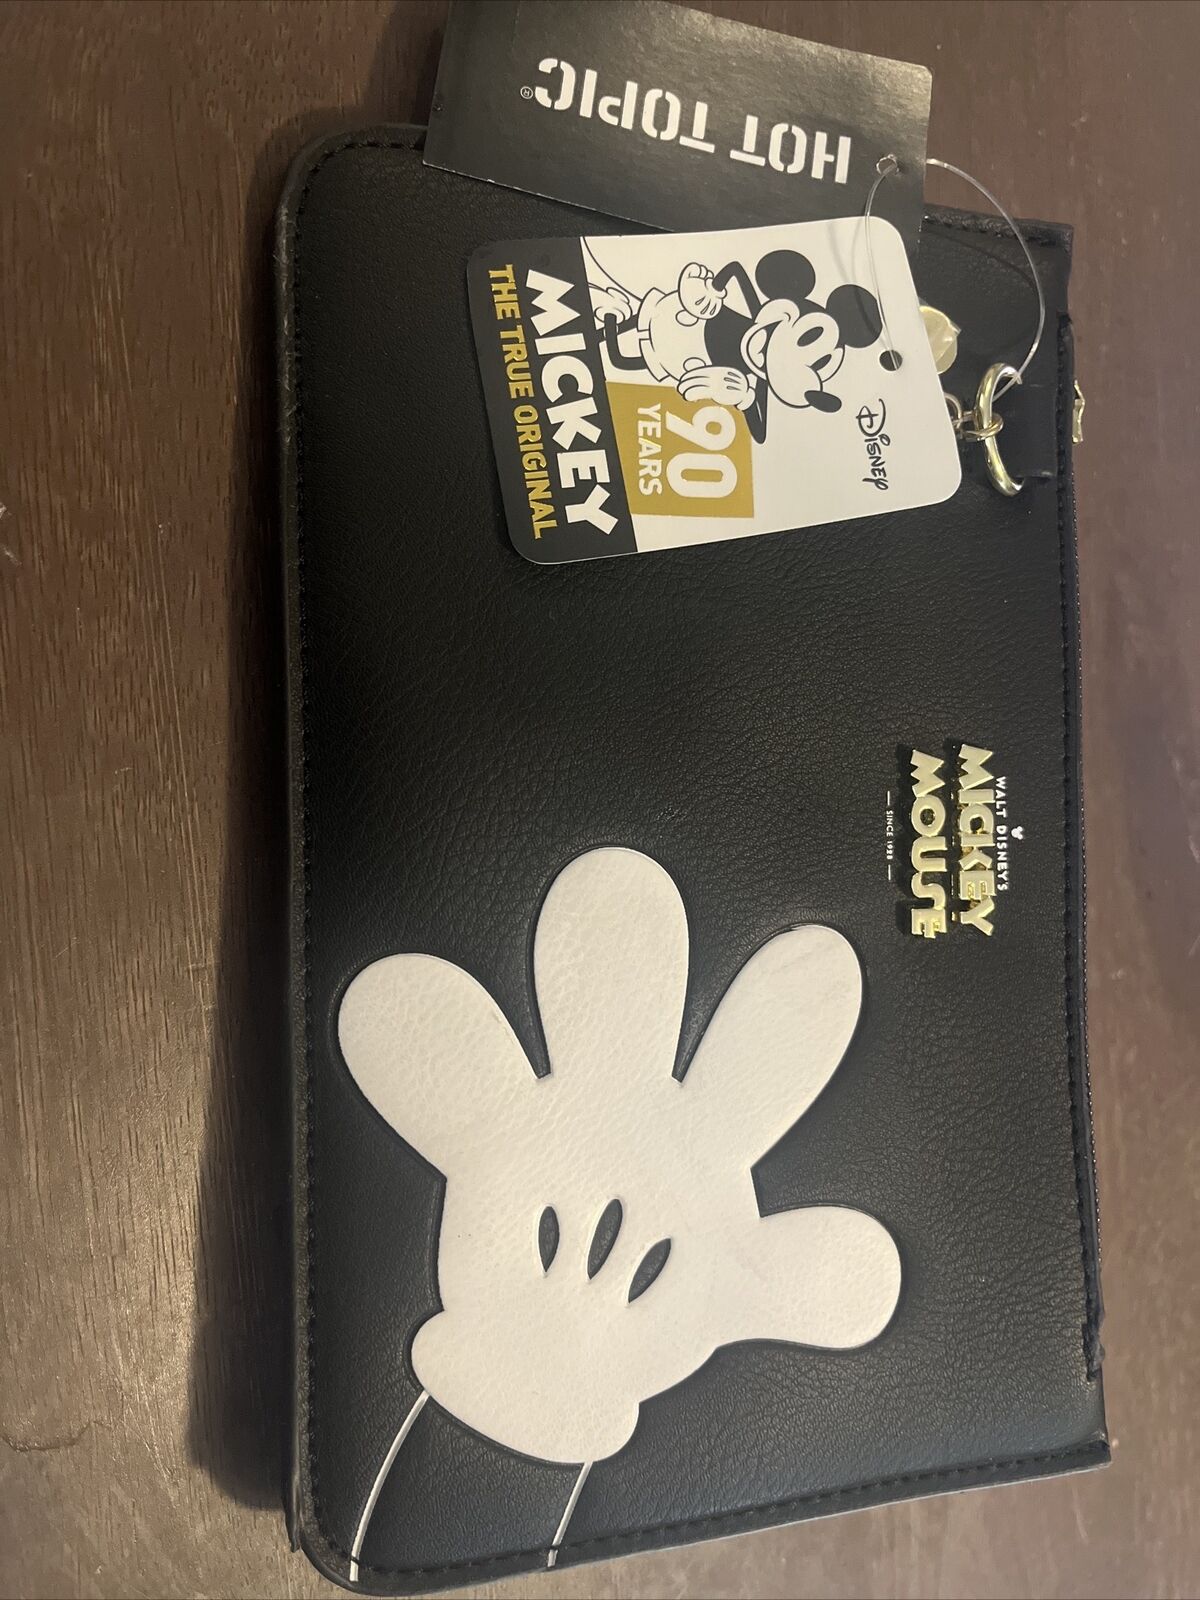 Hot Topic Bioworld Mickey Mouse Glove Belt Bag